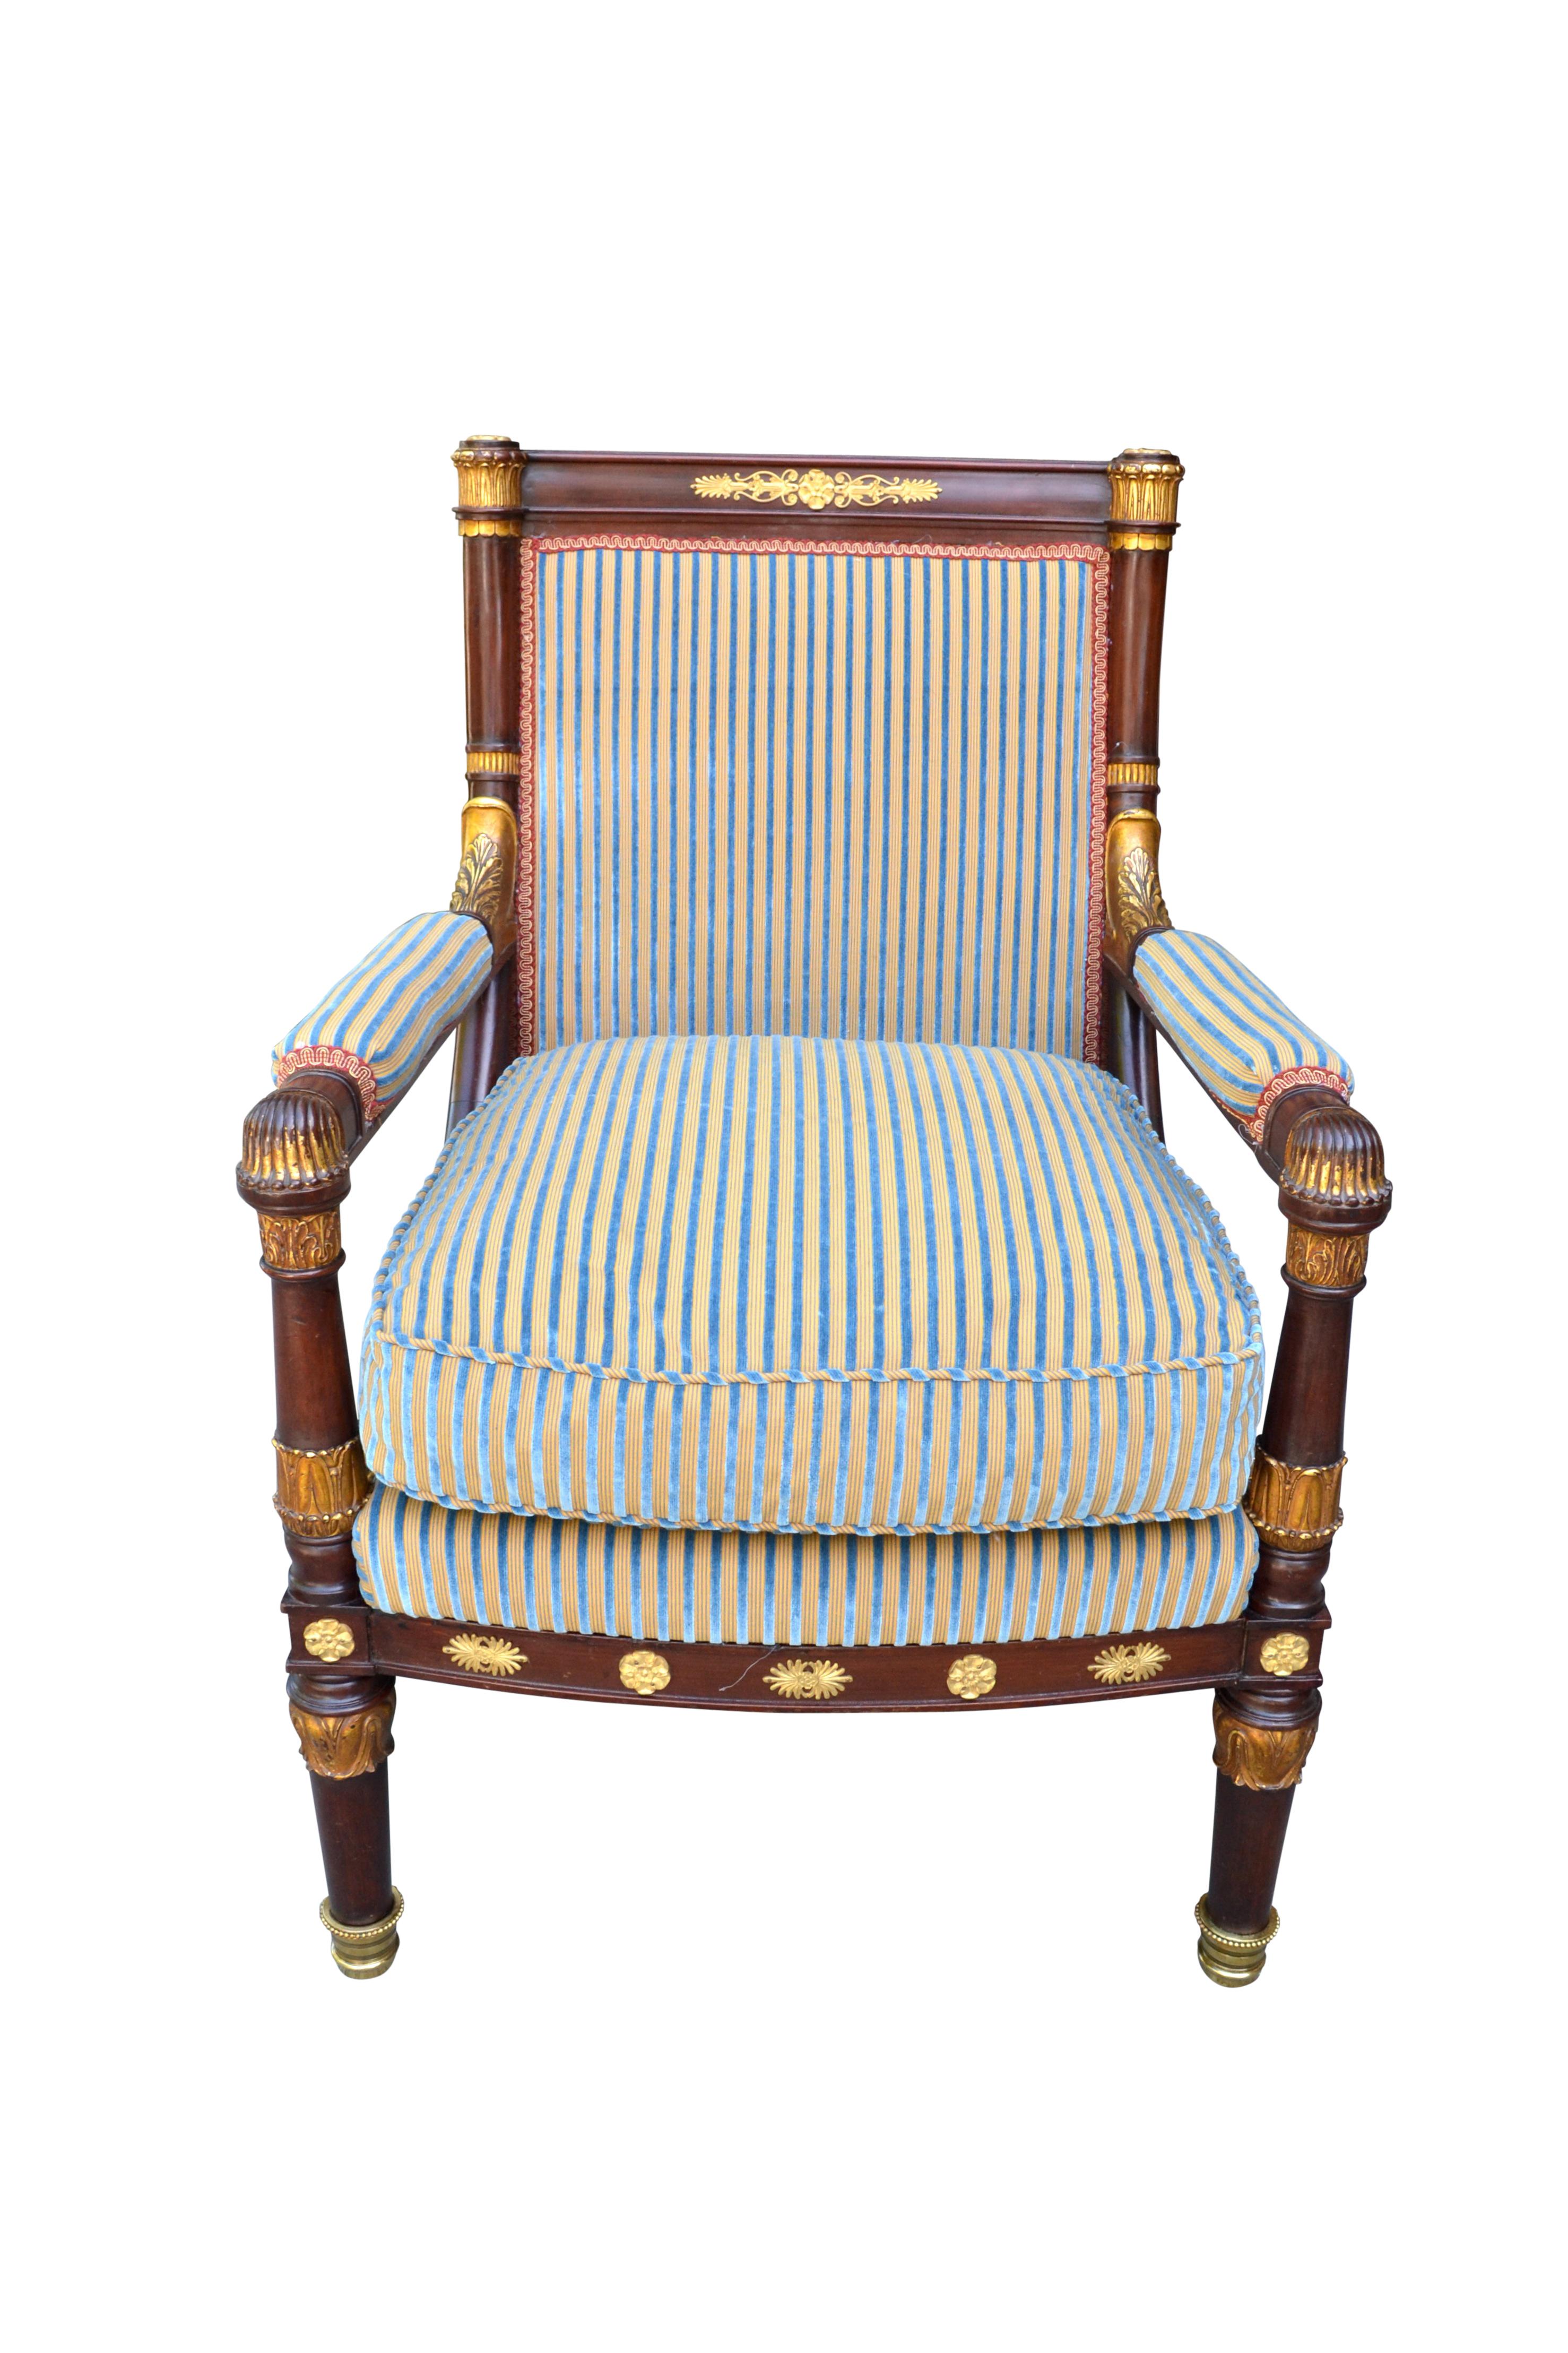 Carved French Empire Style Open Armchair